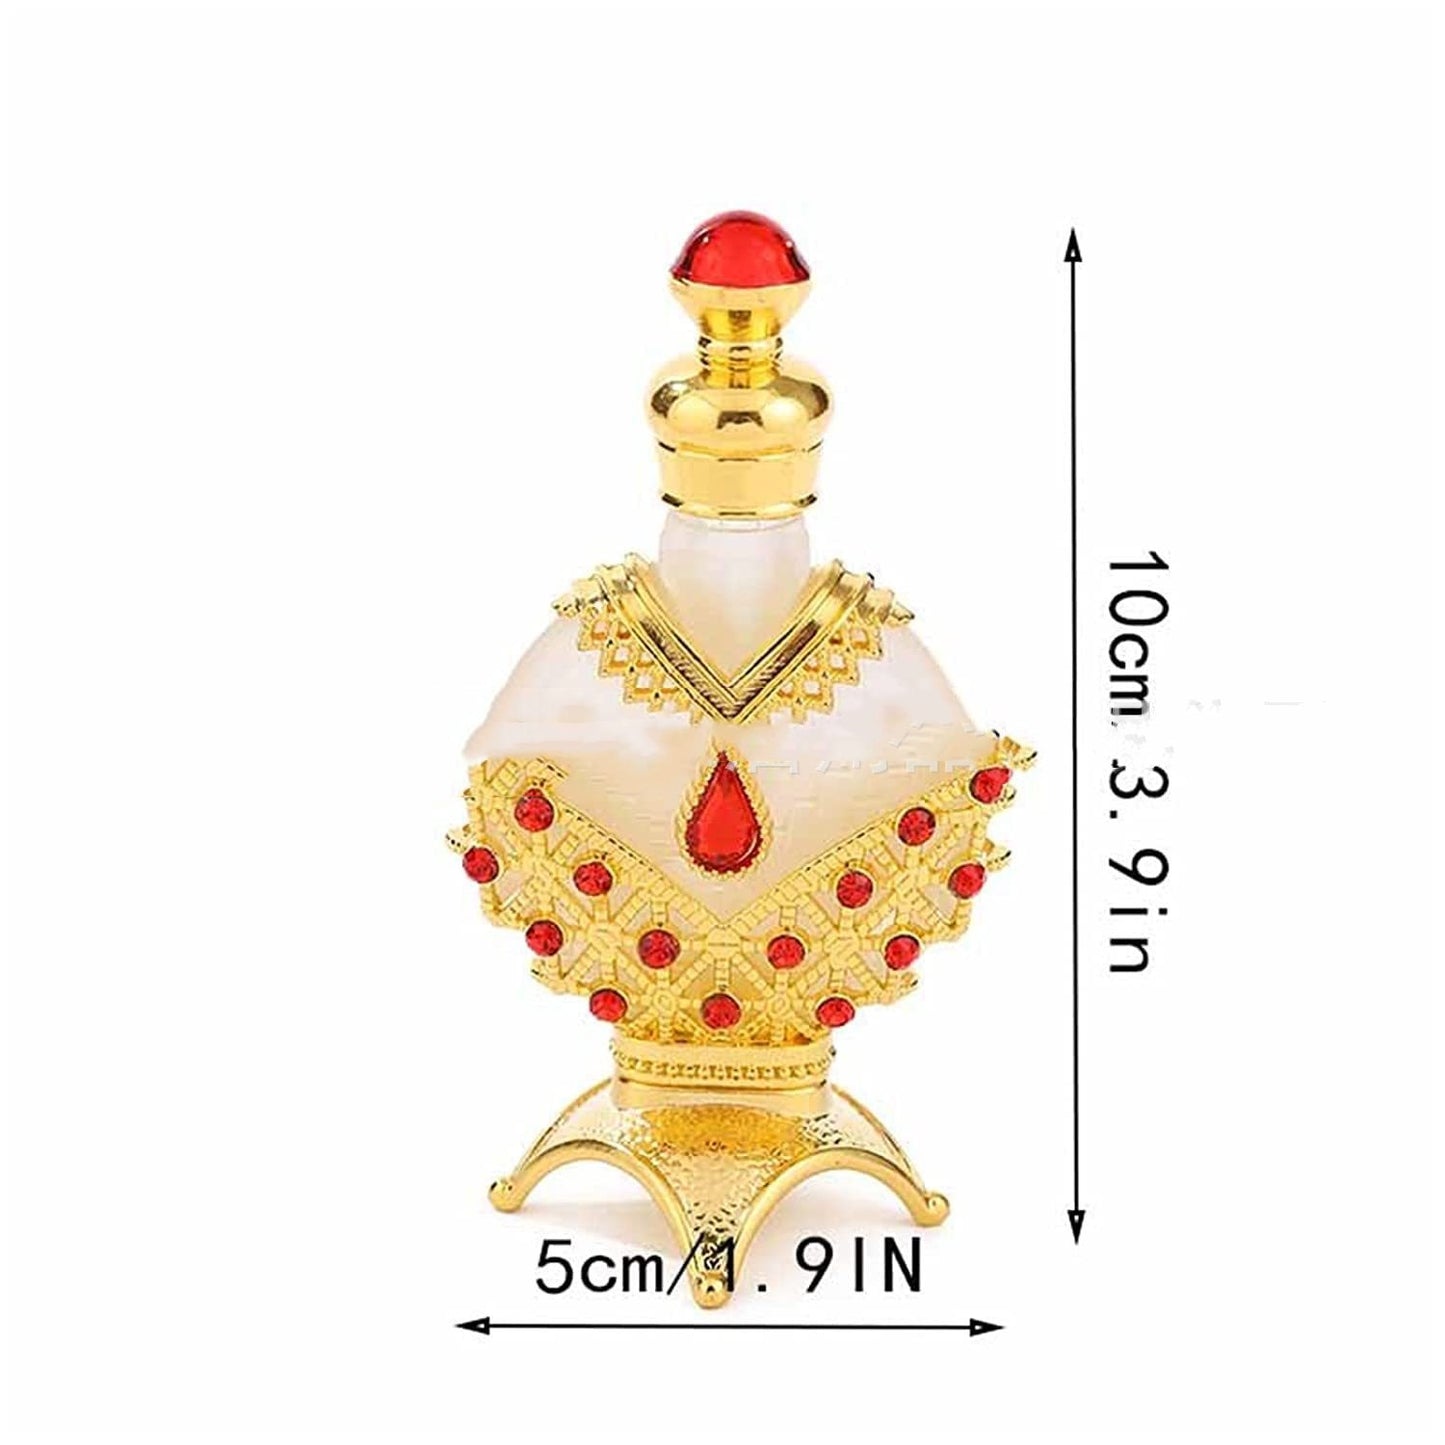 Perfume Oil Concentrated Perfume Oil Lasting Fragrance Mild Non-pungent Portable Concentrated Fragrance Beauty Products